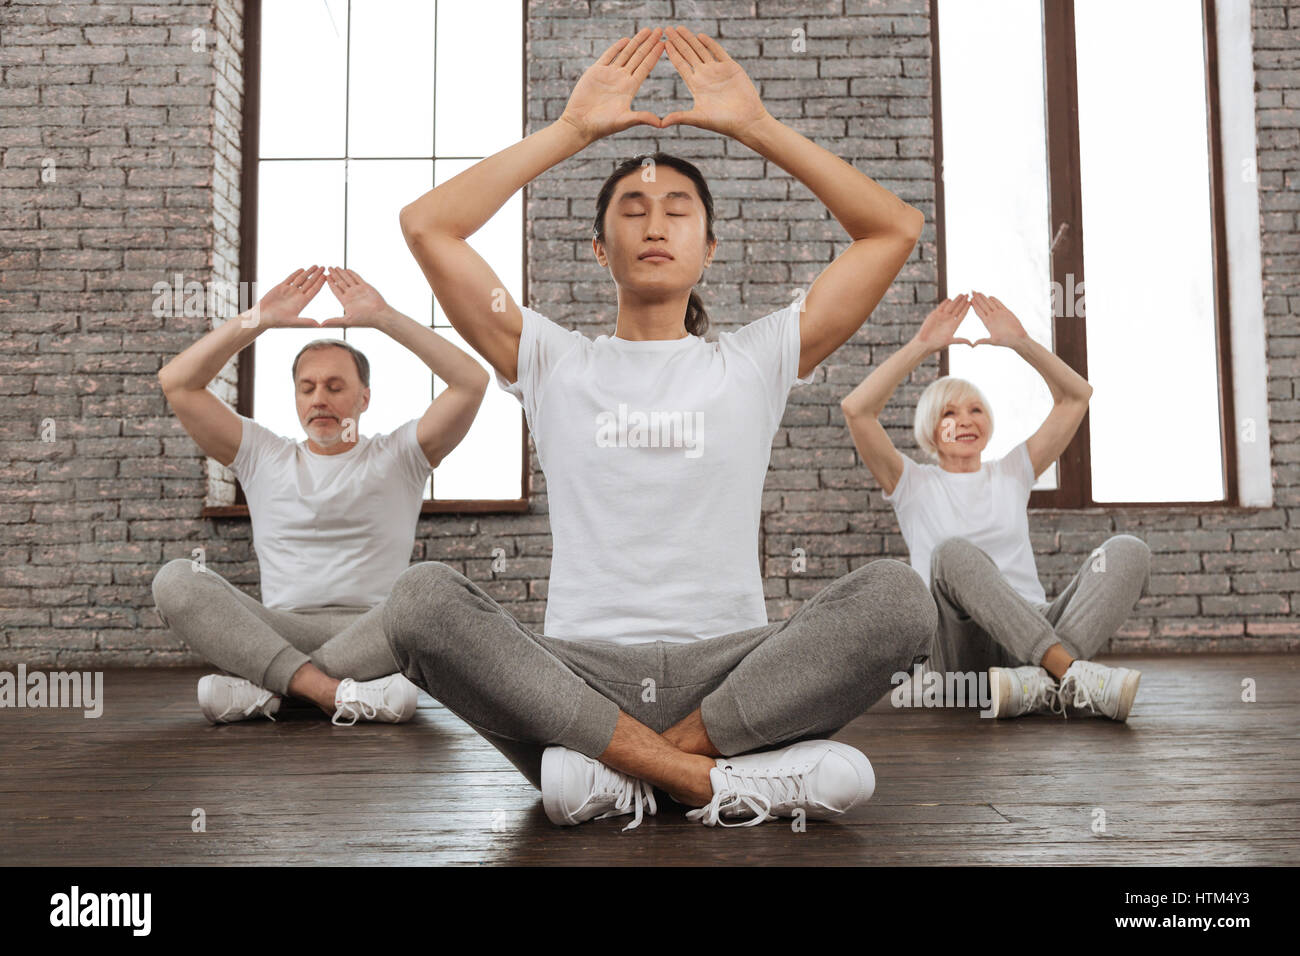 Group Four Happy People Doing Yoga Stock Photo 256171708 | Shutterstock